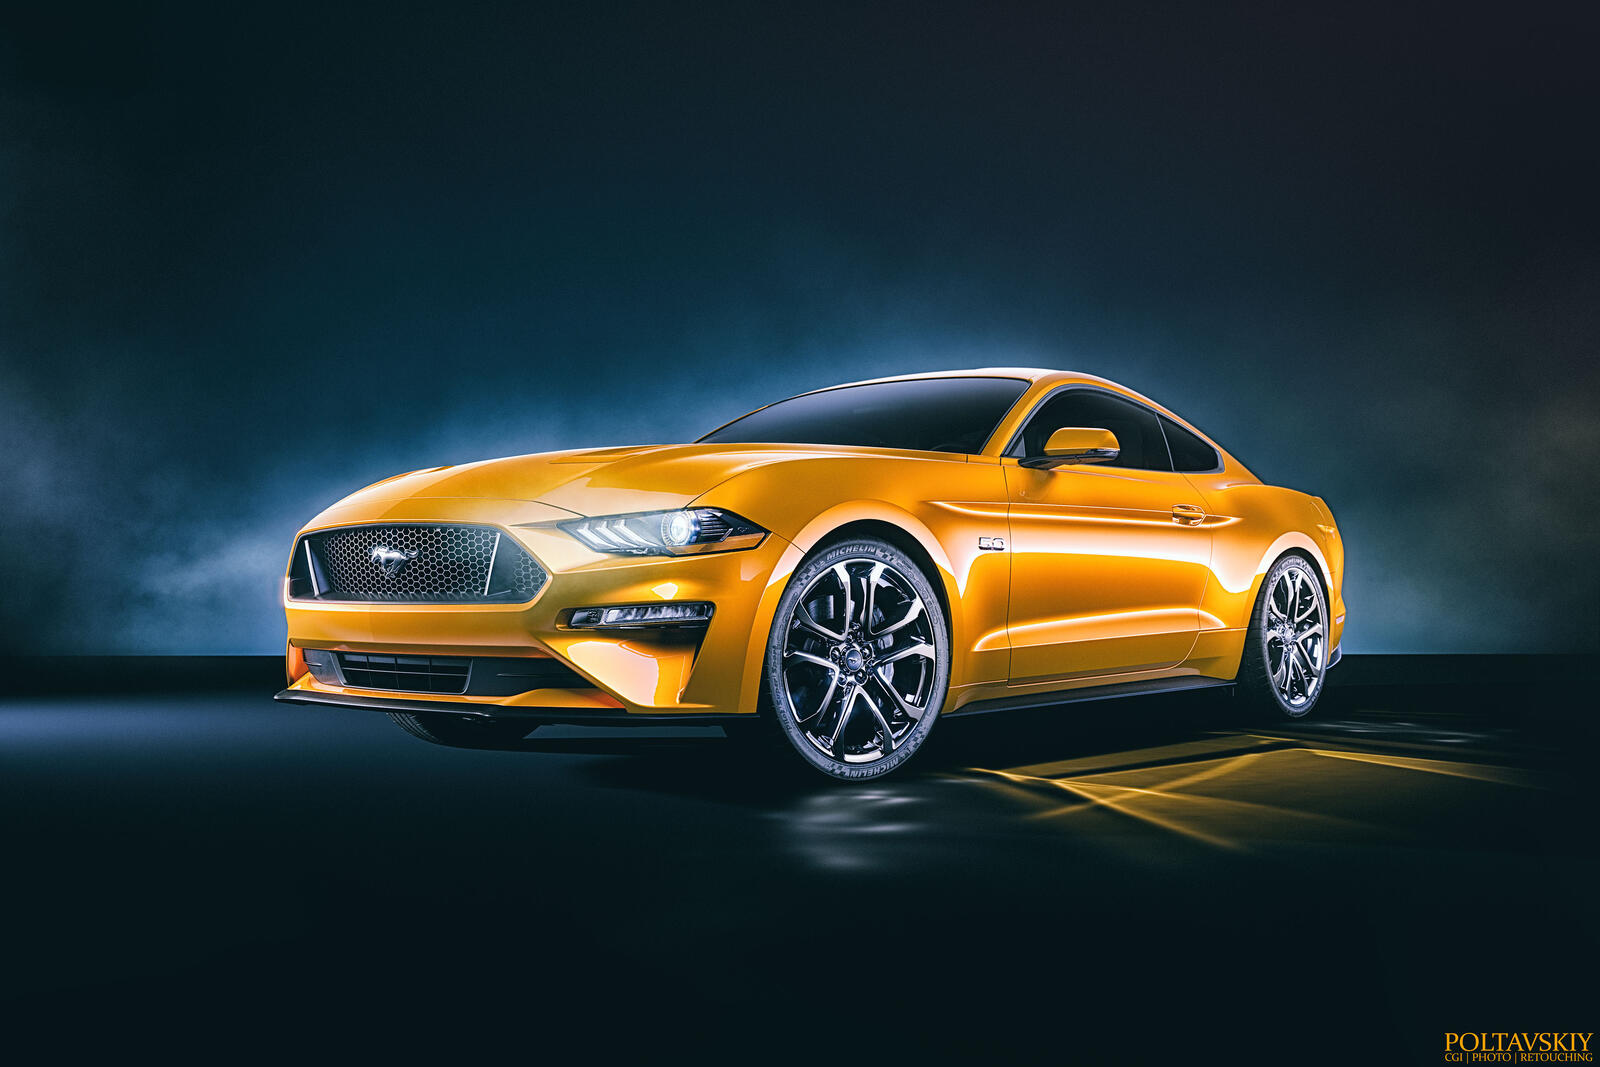 Wallpapers Mustang Ford Behance on the desktop